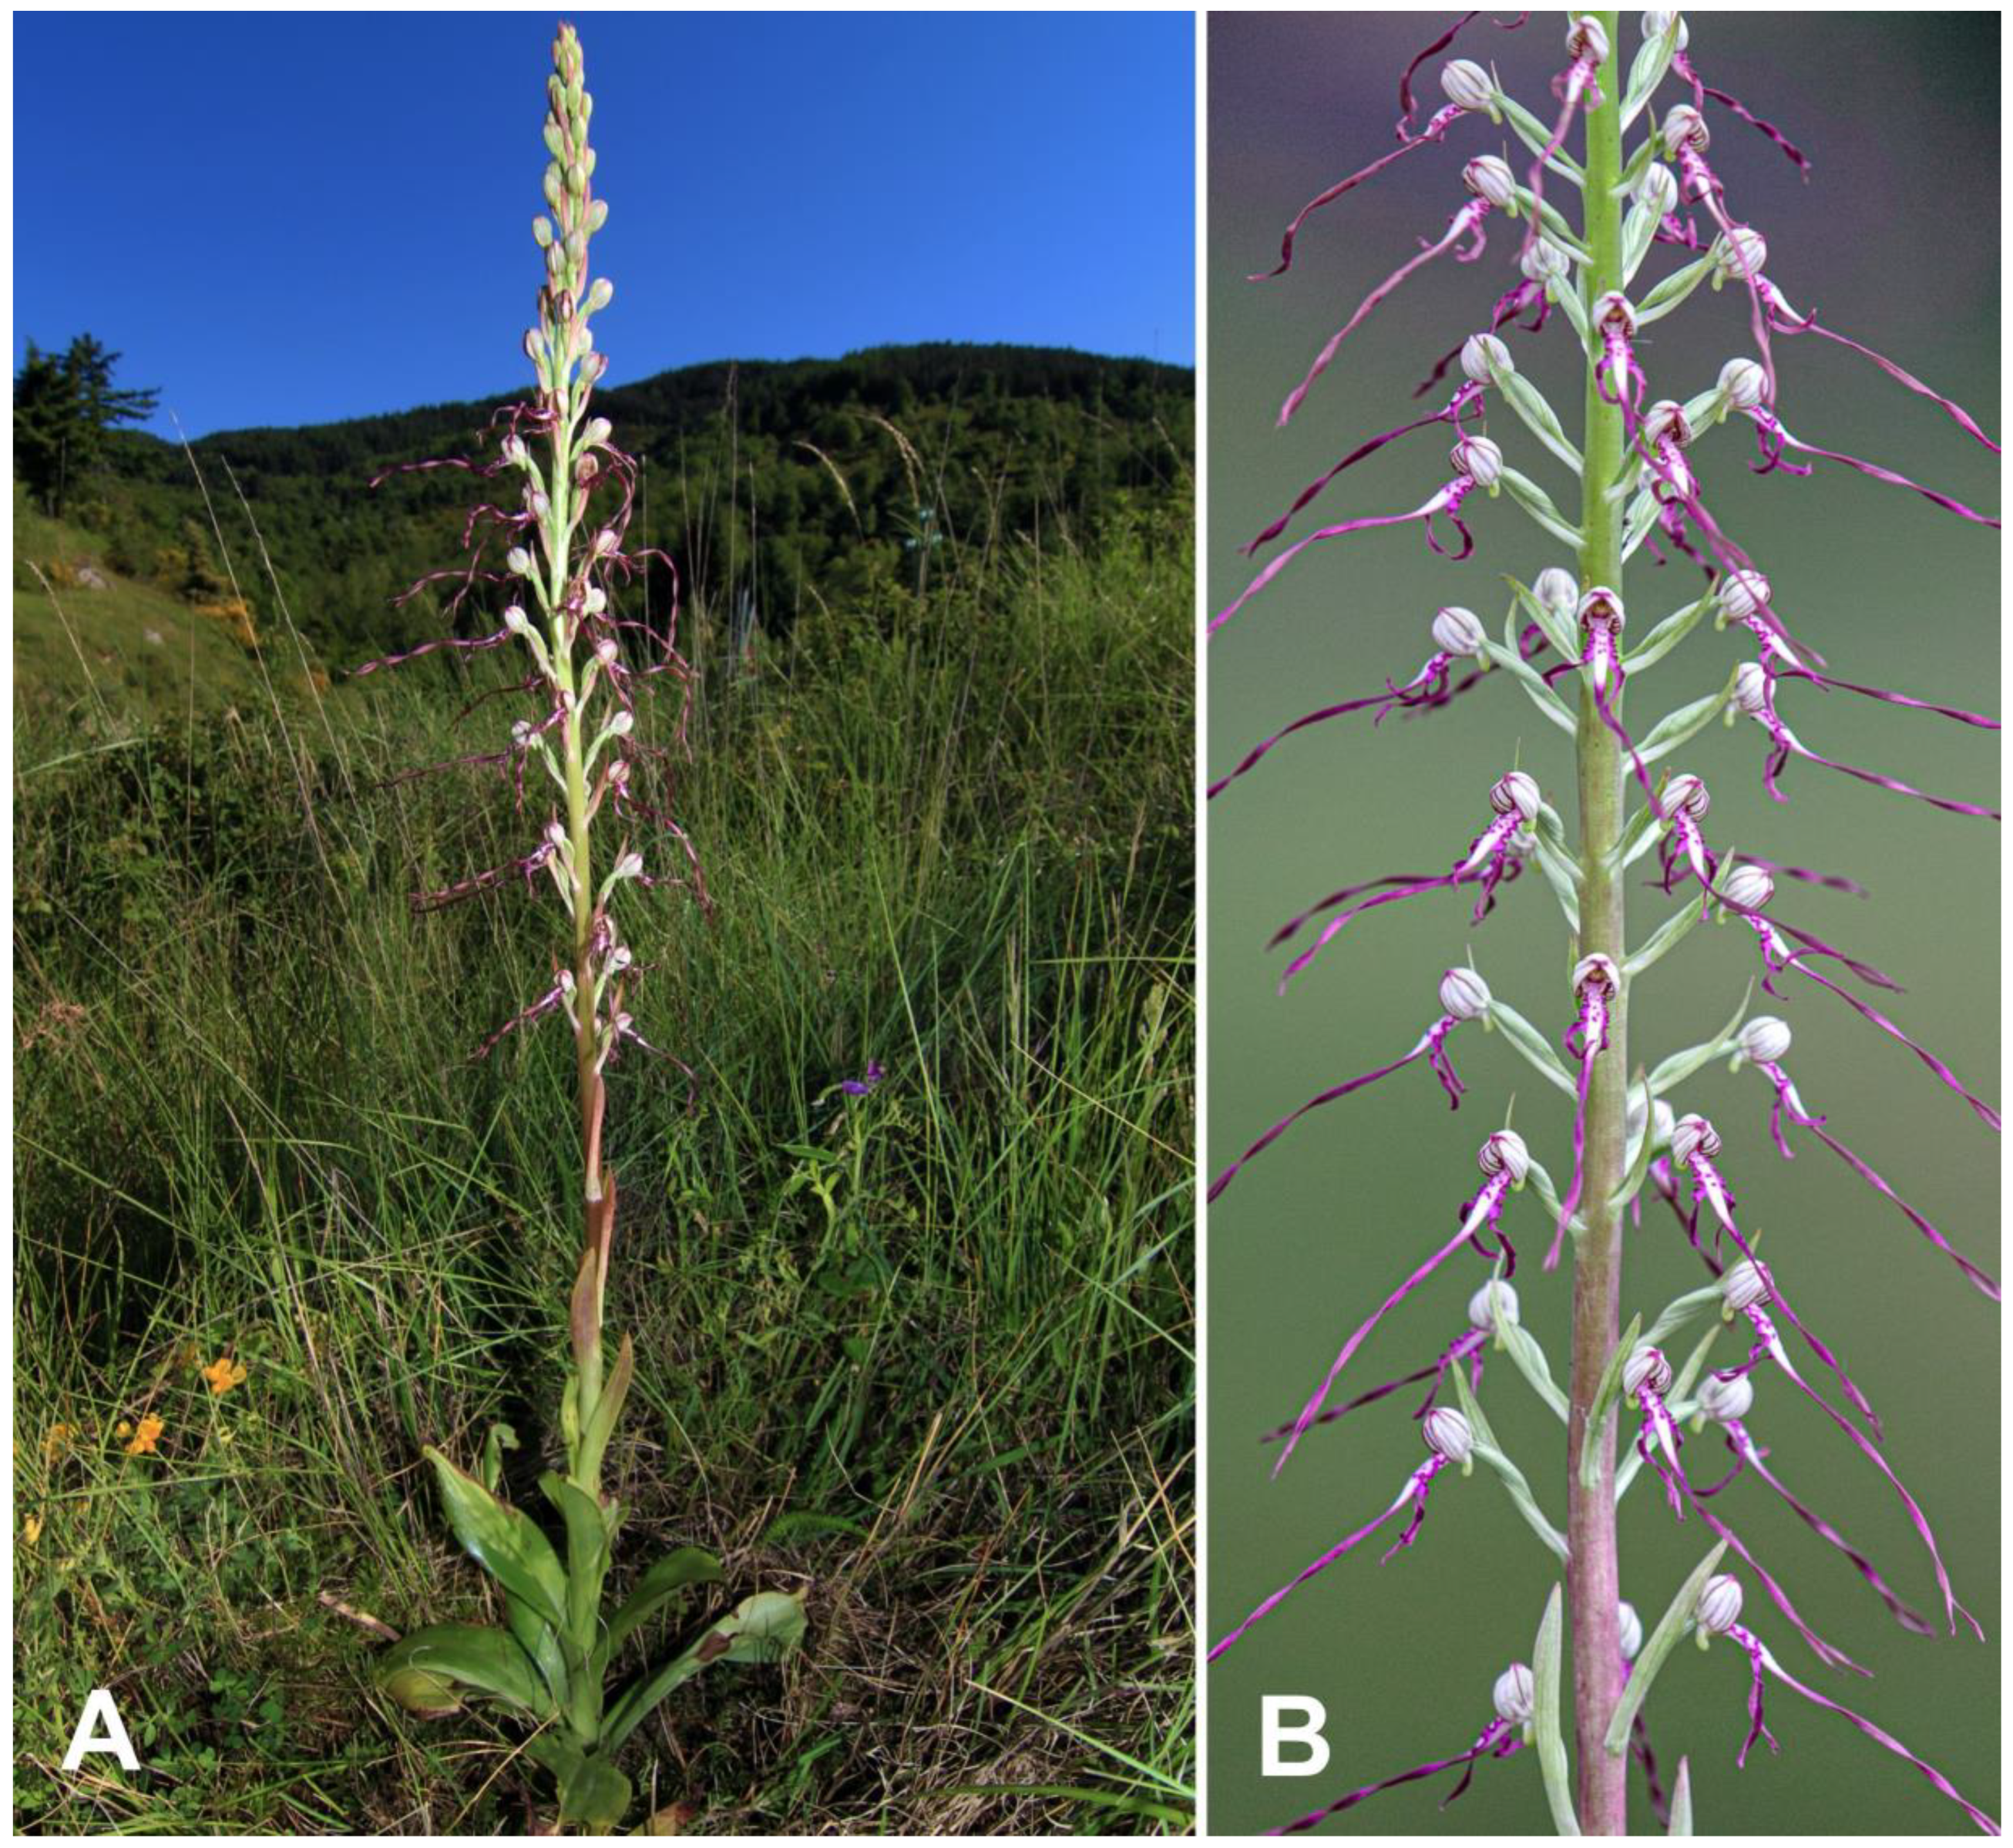 Plants | Free Full-Text | Himantoglossum adriaticum H. Baumann ×  Himantoglossum robertianum (Loisel.) P. Delforge: A New Interspecific  Hybrid Assessed by Barcoding Analysis